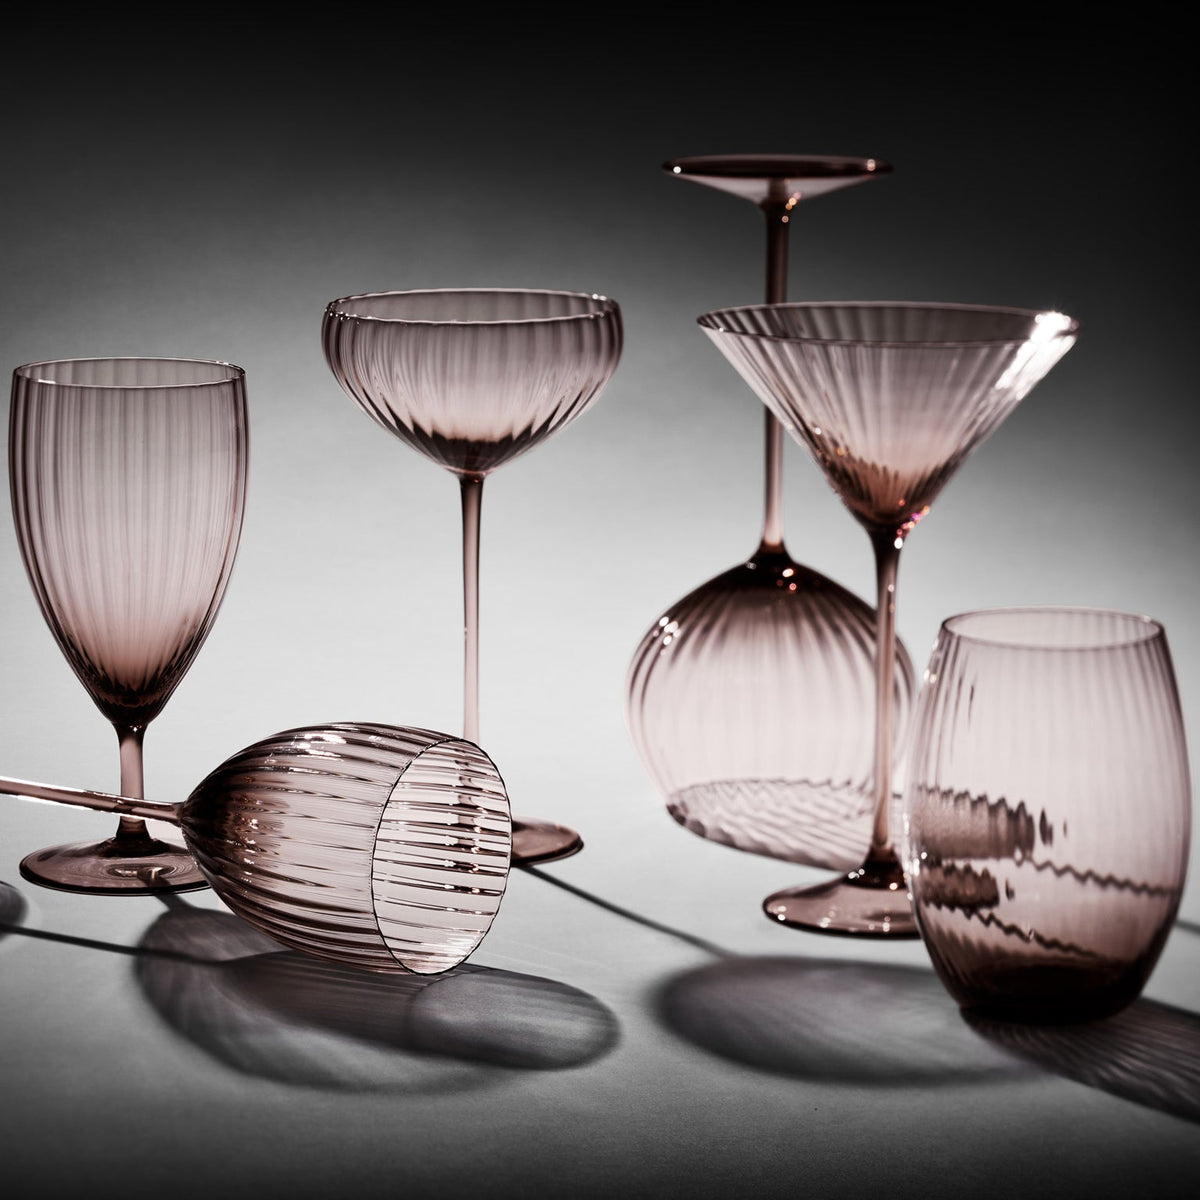 The Quinn Mocha mouth blown crystal collection by Caskata includes everyday, white wine, coupe, red wine, martini, and tumbler glasses.